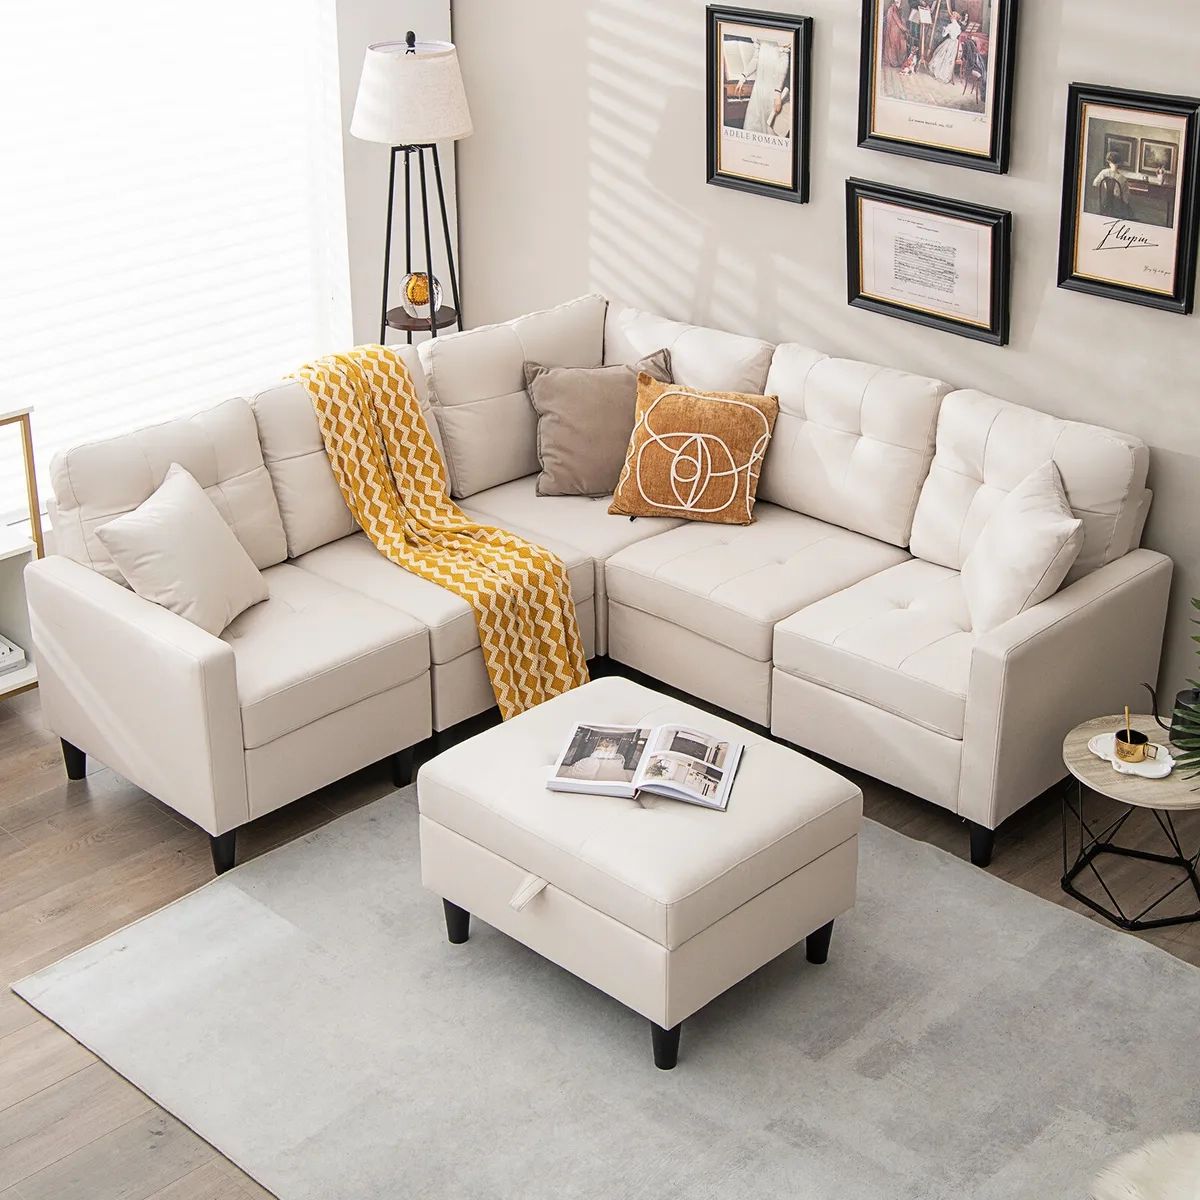 L Shaped Sectional Corner Sofa Set W/ Removable Ottoman & Seat Cushions  Beige | Ebay Throughout Beige L Shaped Sectional Sofas (View 5 of 15)